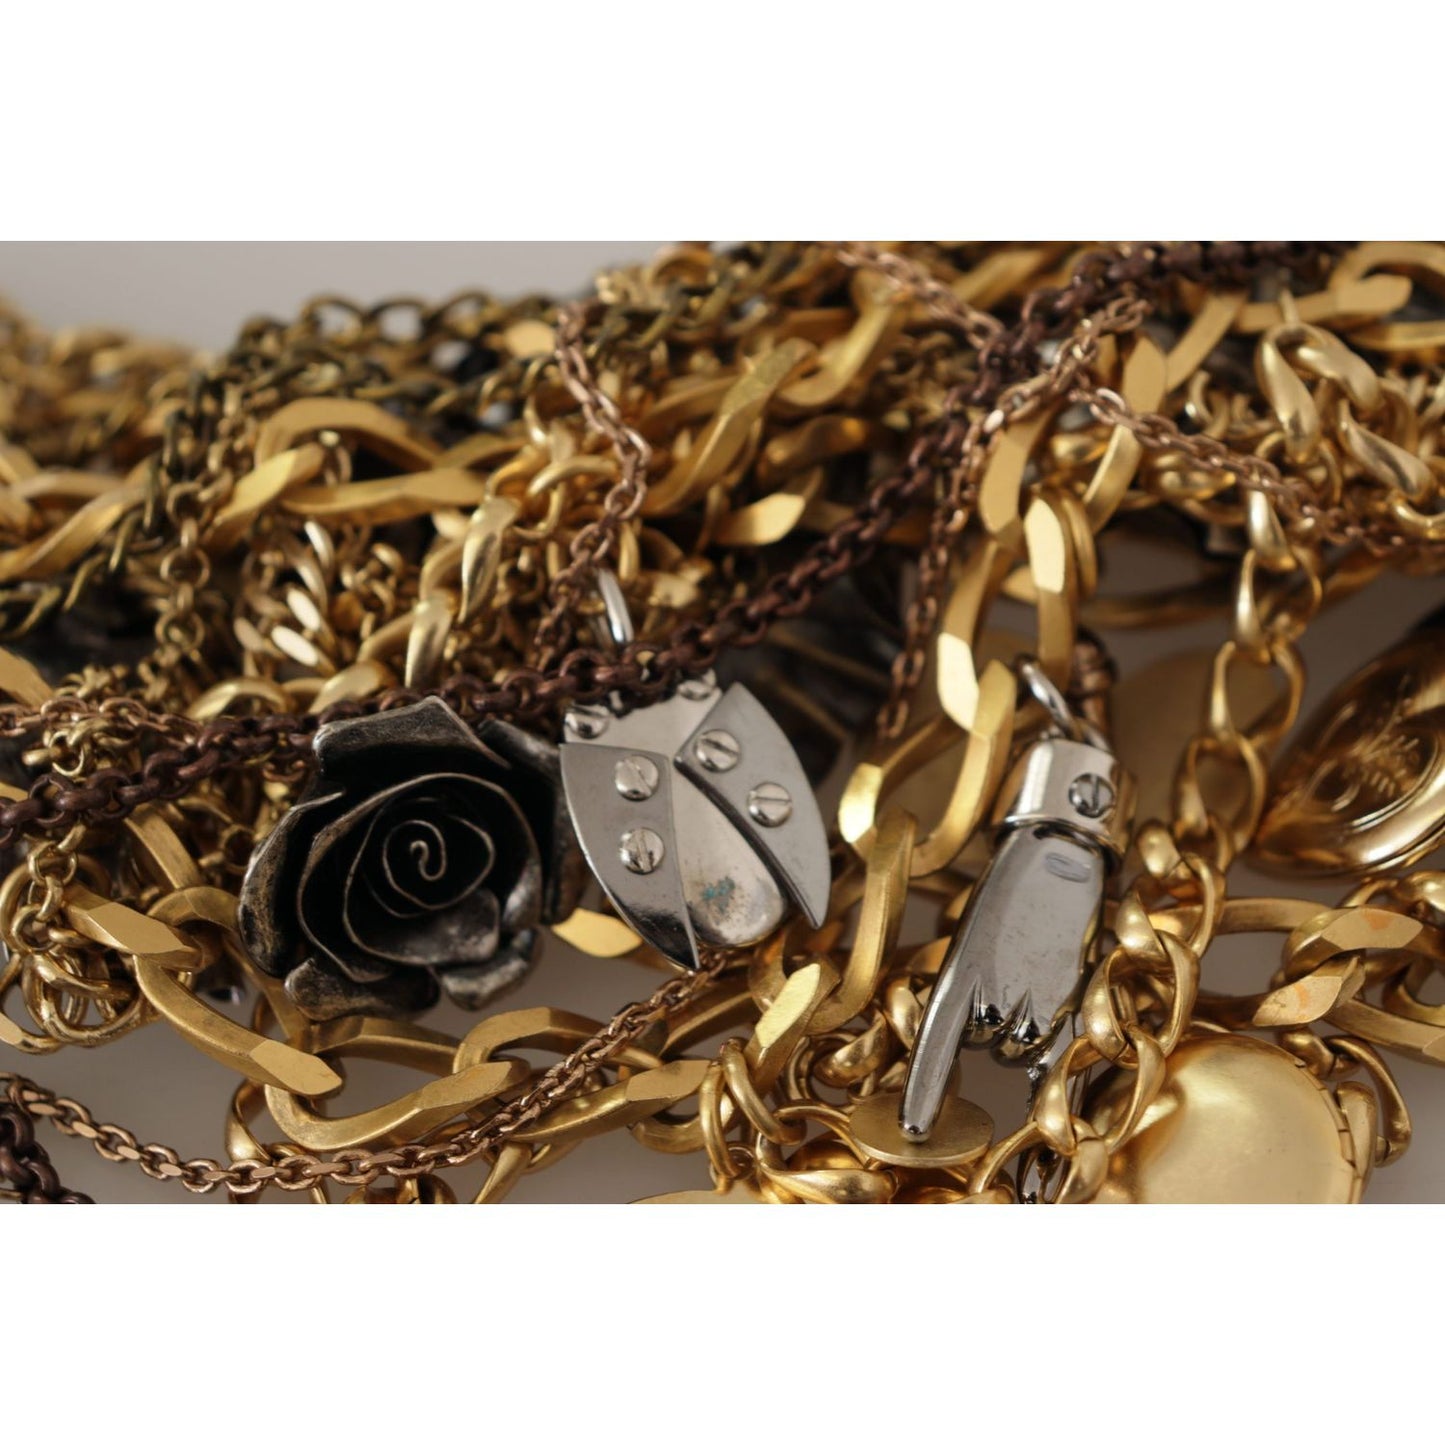 Dolce & Gabbana Sicilian Glamour Gold Statement Necklace gold-brass-sicily-charm-heart-statement-necklace WOMAN NECKLACE IMG_3838-scaled-122b18c6-bed.jpg